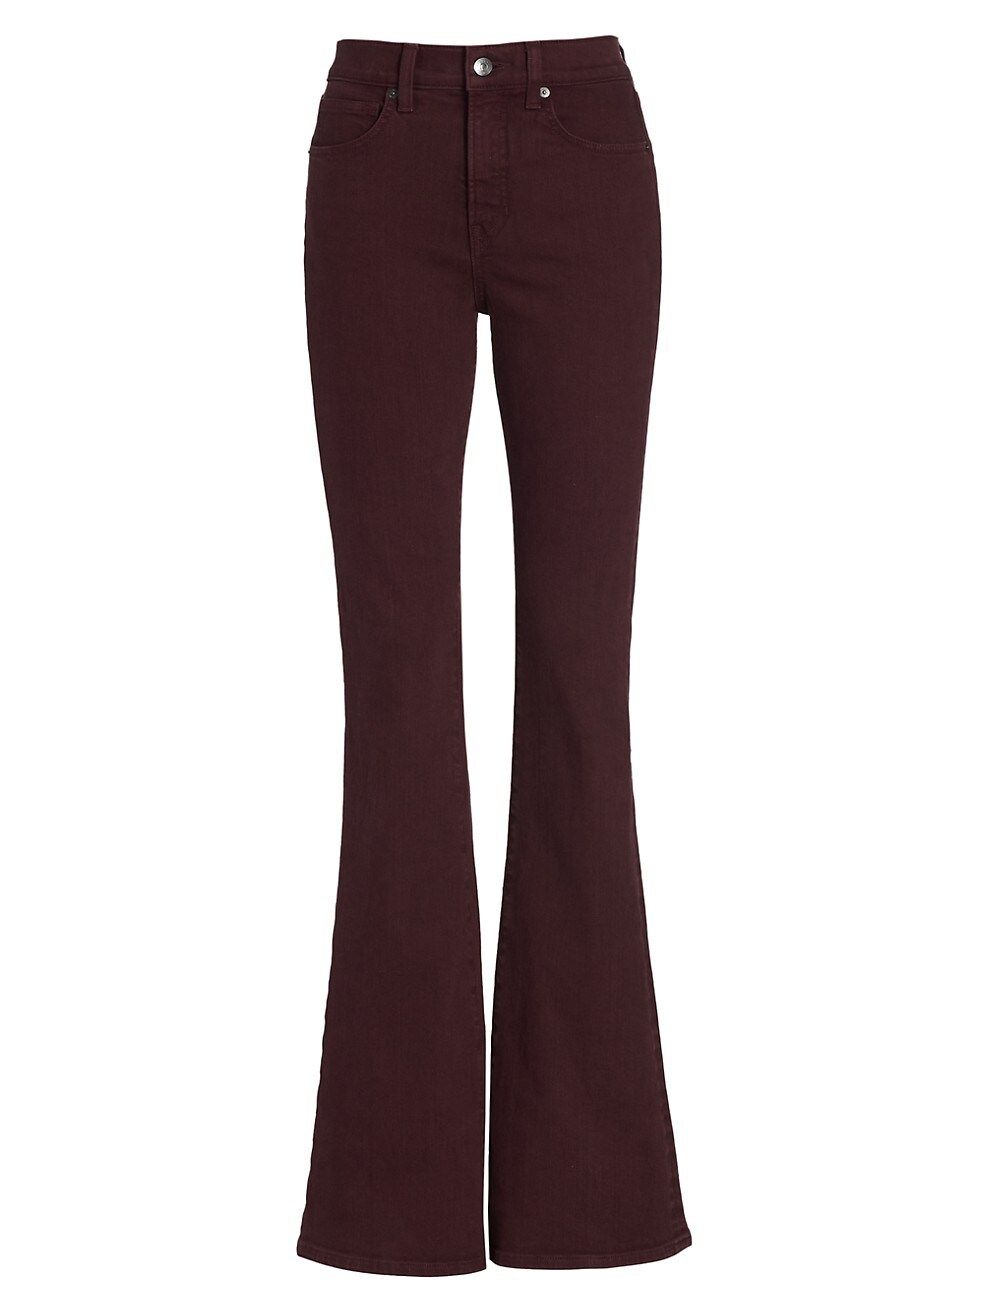 Veronica Beard Beverly High-Rise Stretch Flare Jeans | Saks Fifth Avenue